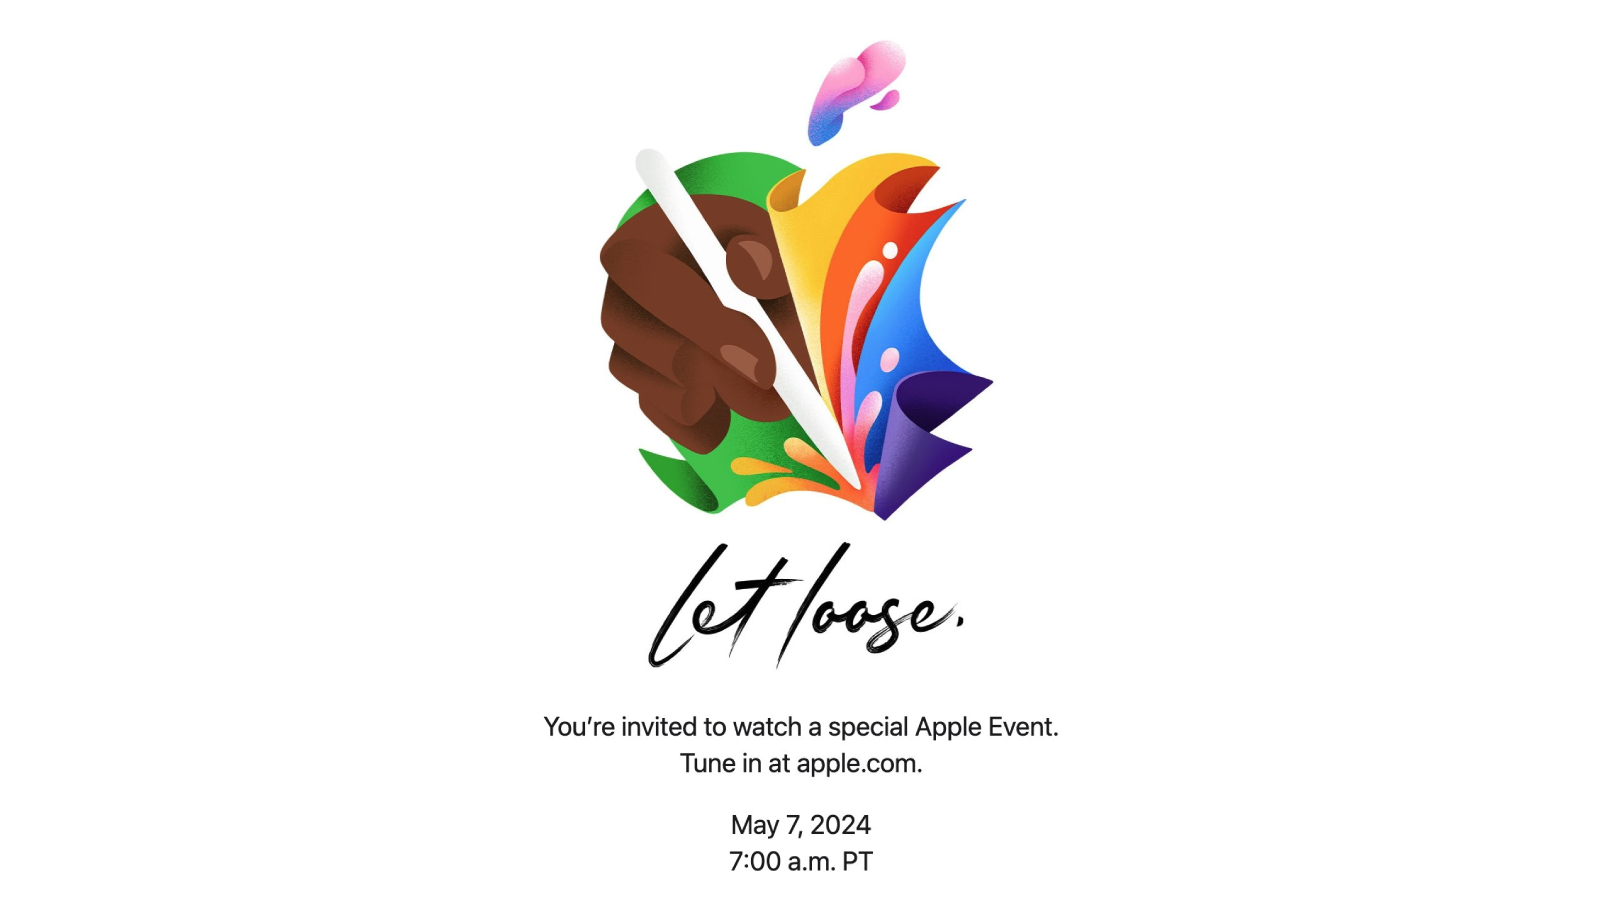 Apple Announces 'Let Loose' Event on May 7